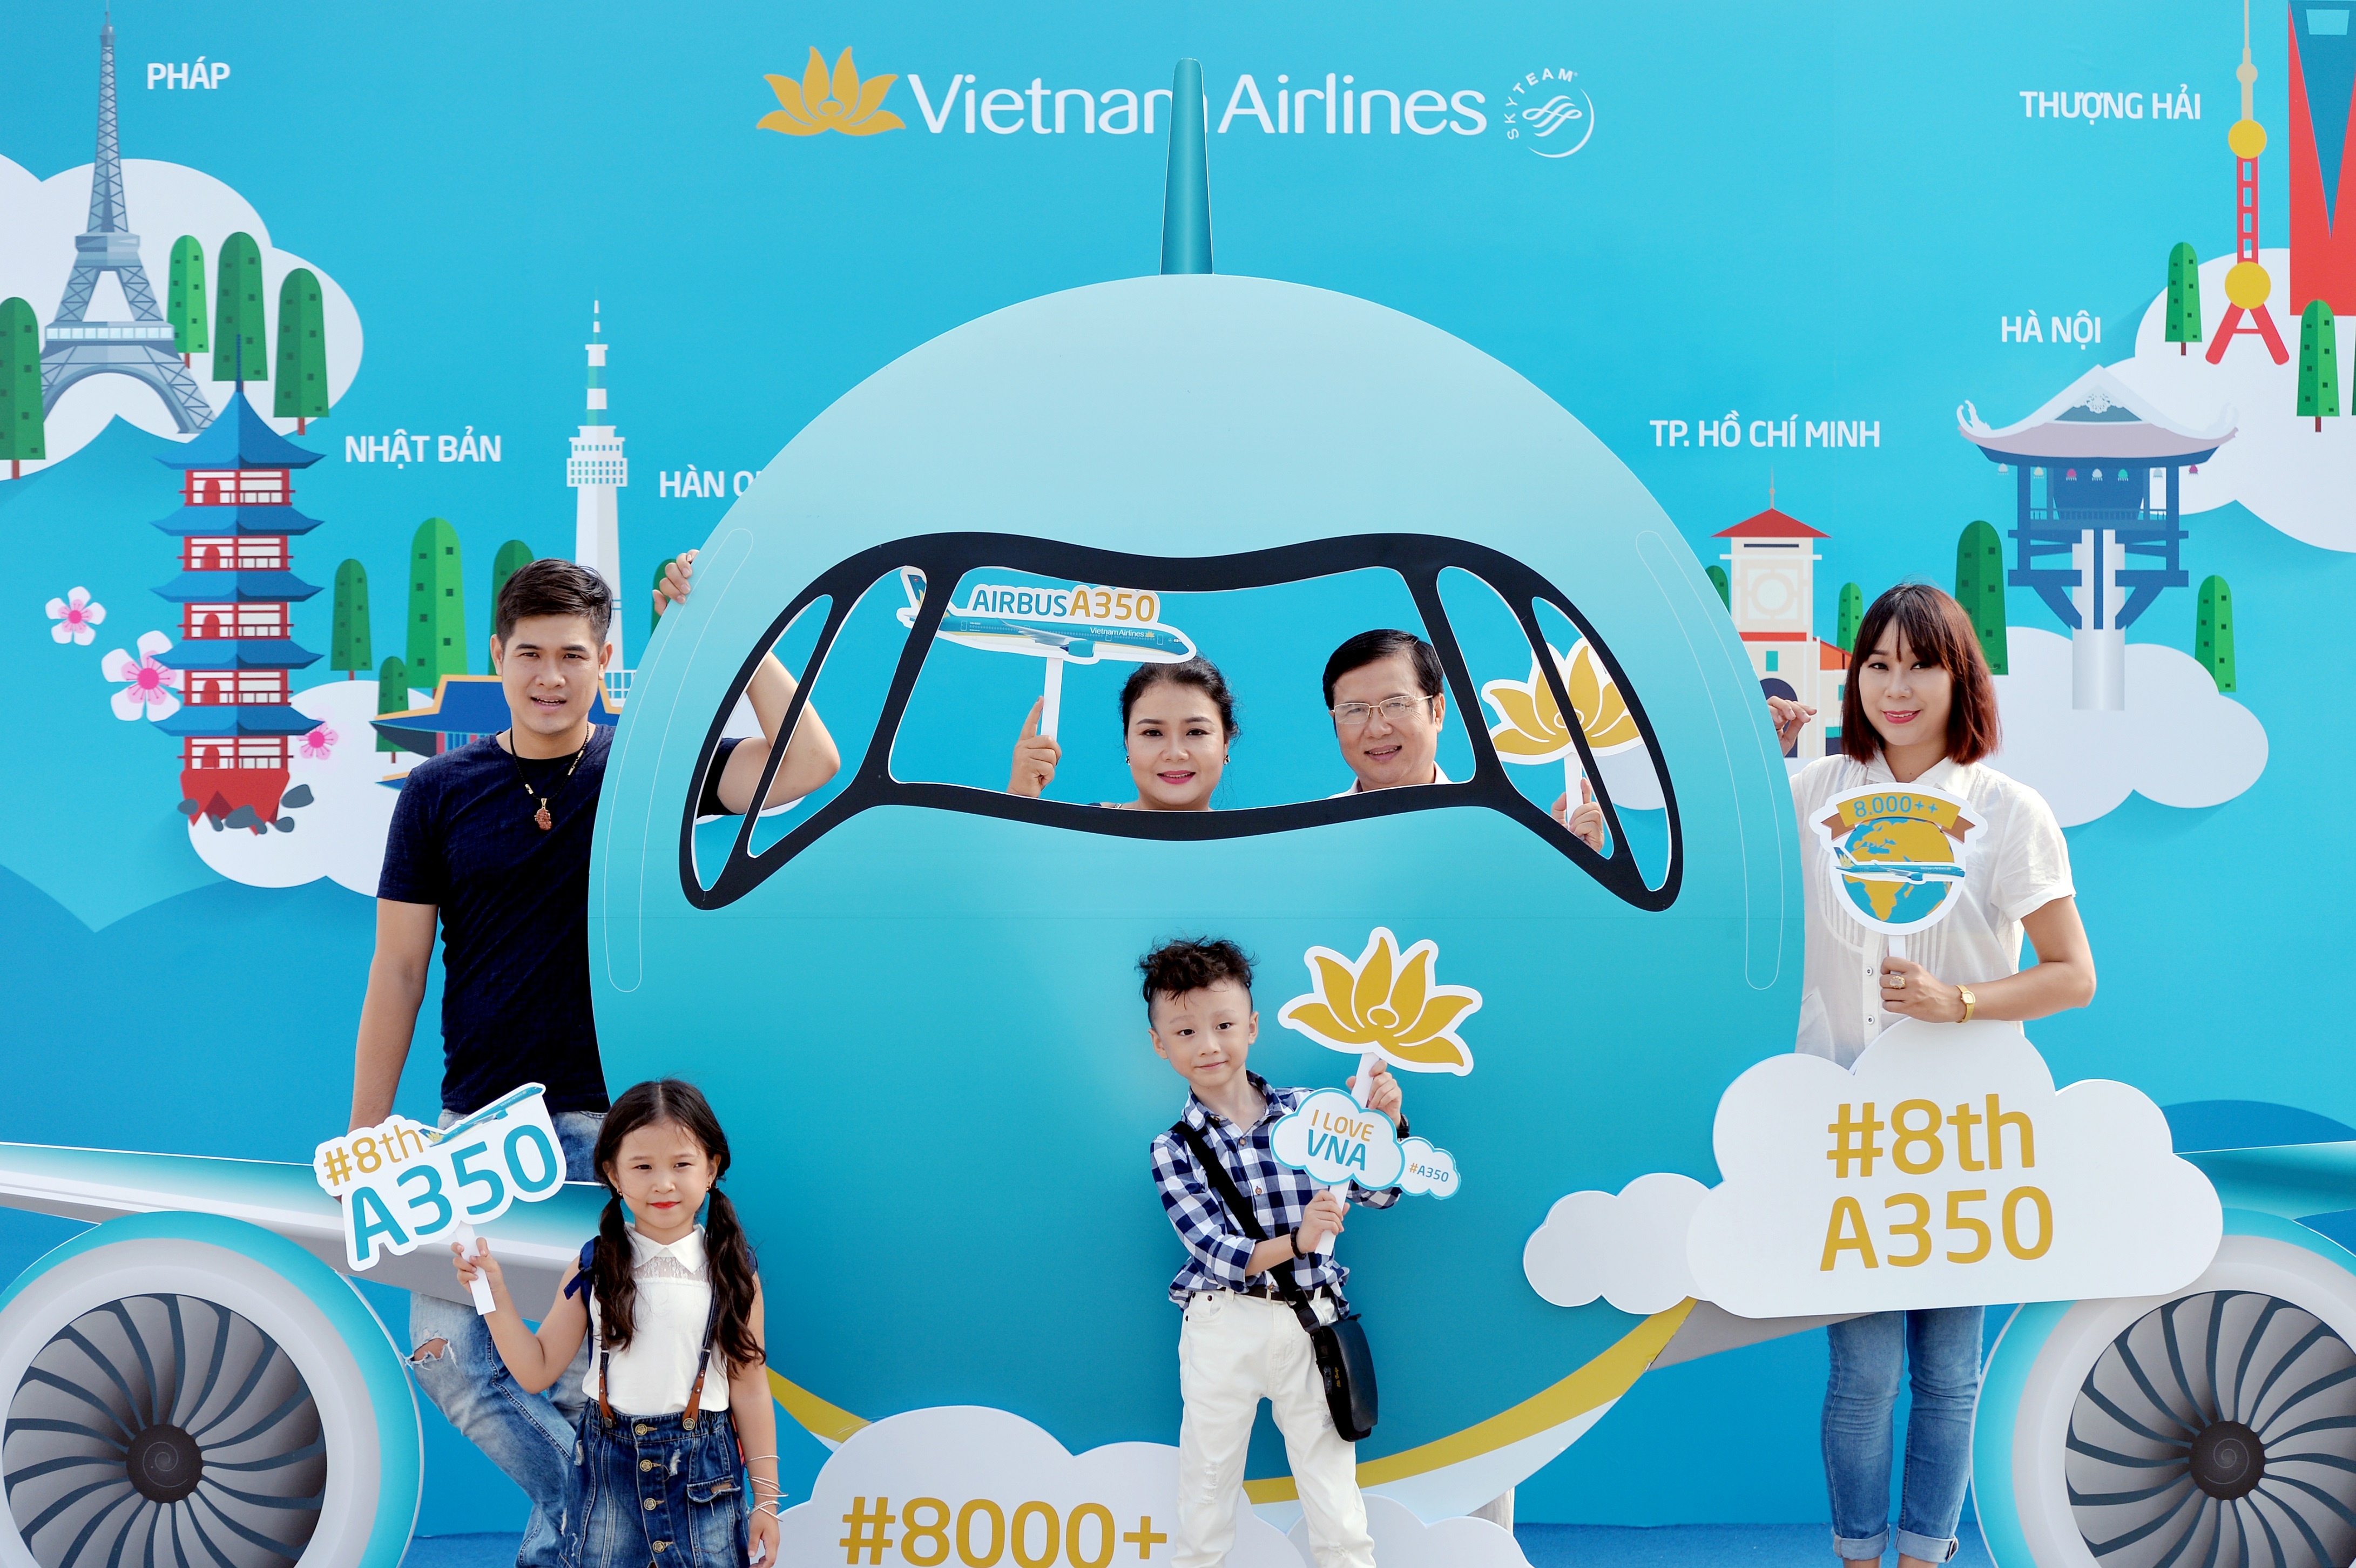 hanh khach Vietnam Airlines di may bay Airbus A350 anh 2